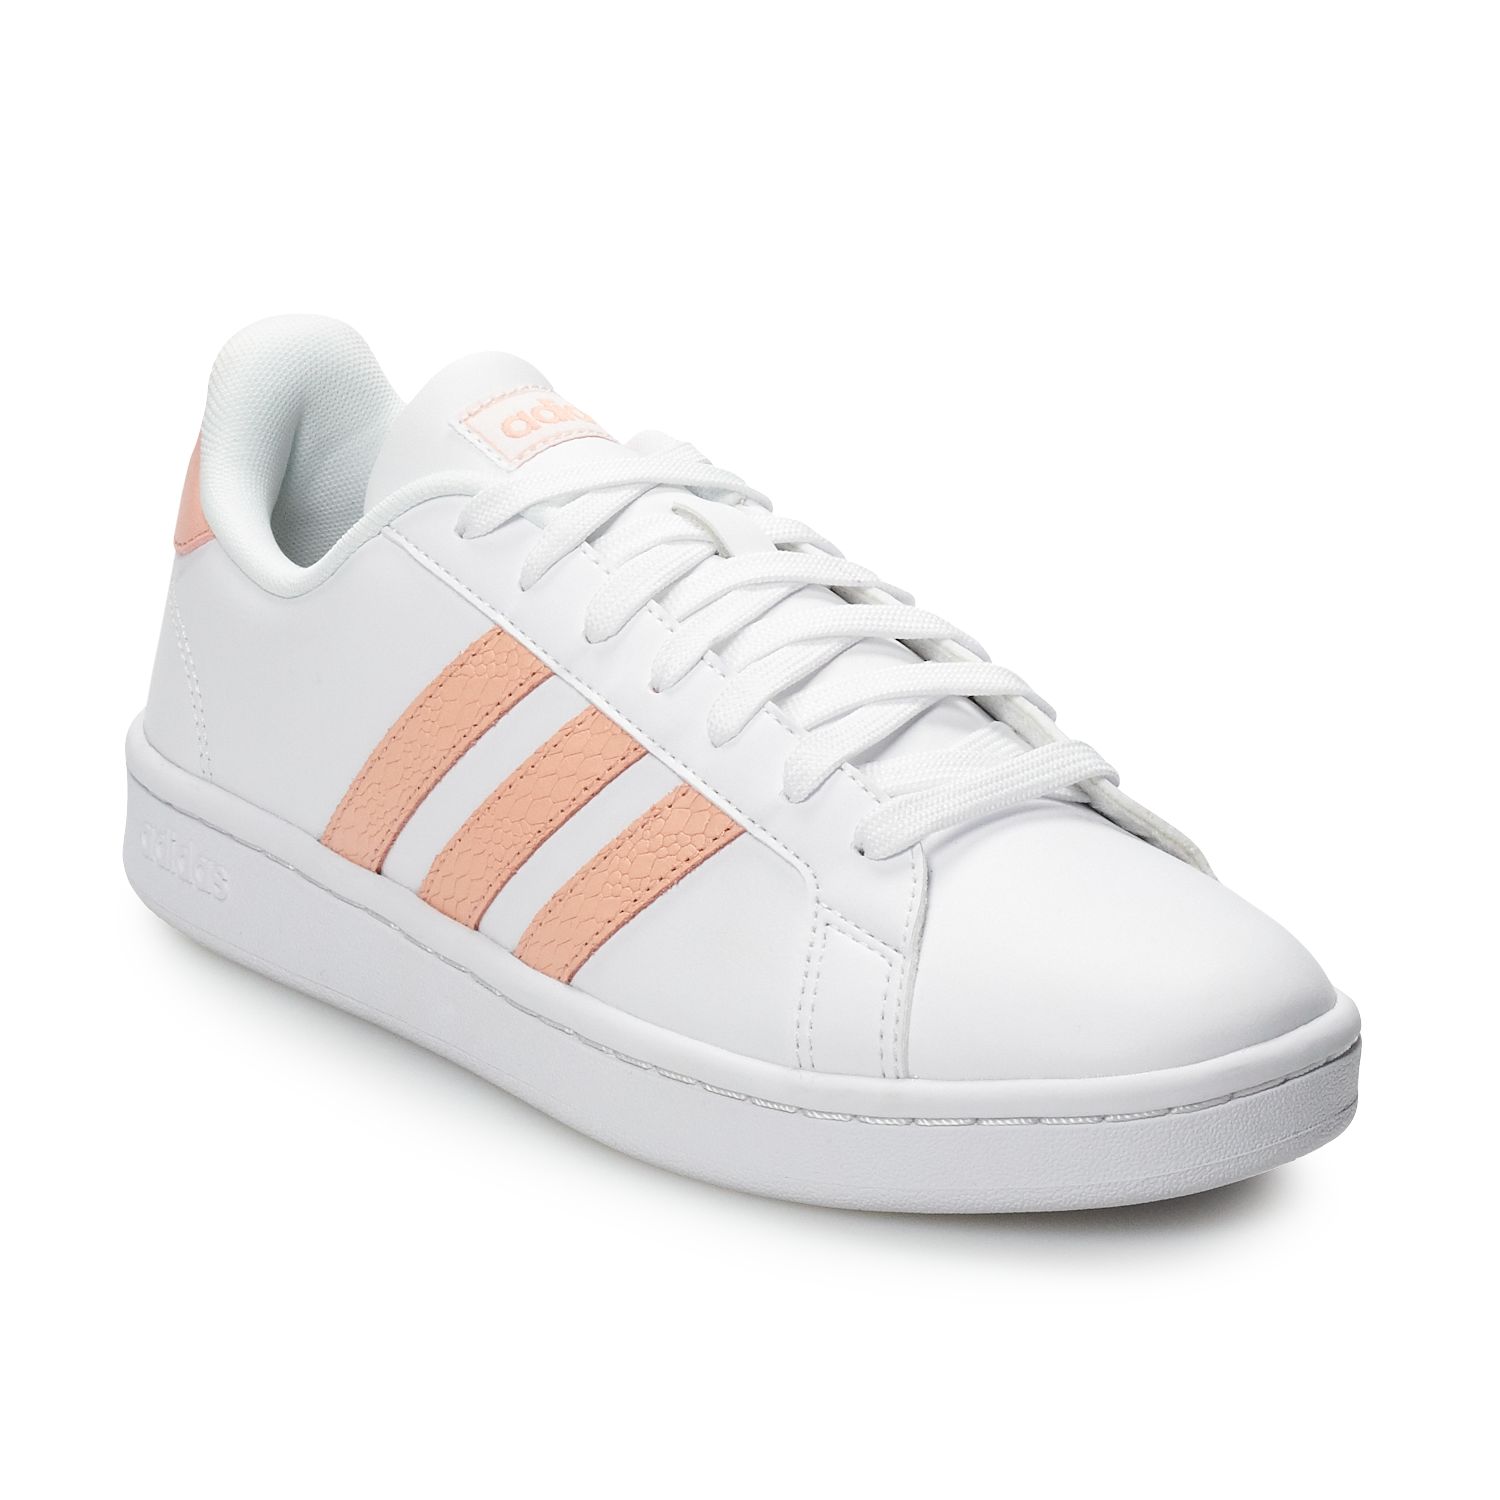 adidas Grand Court Women's Sneakers